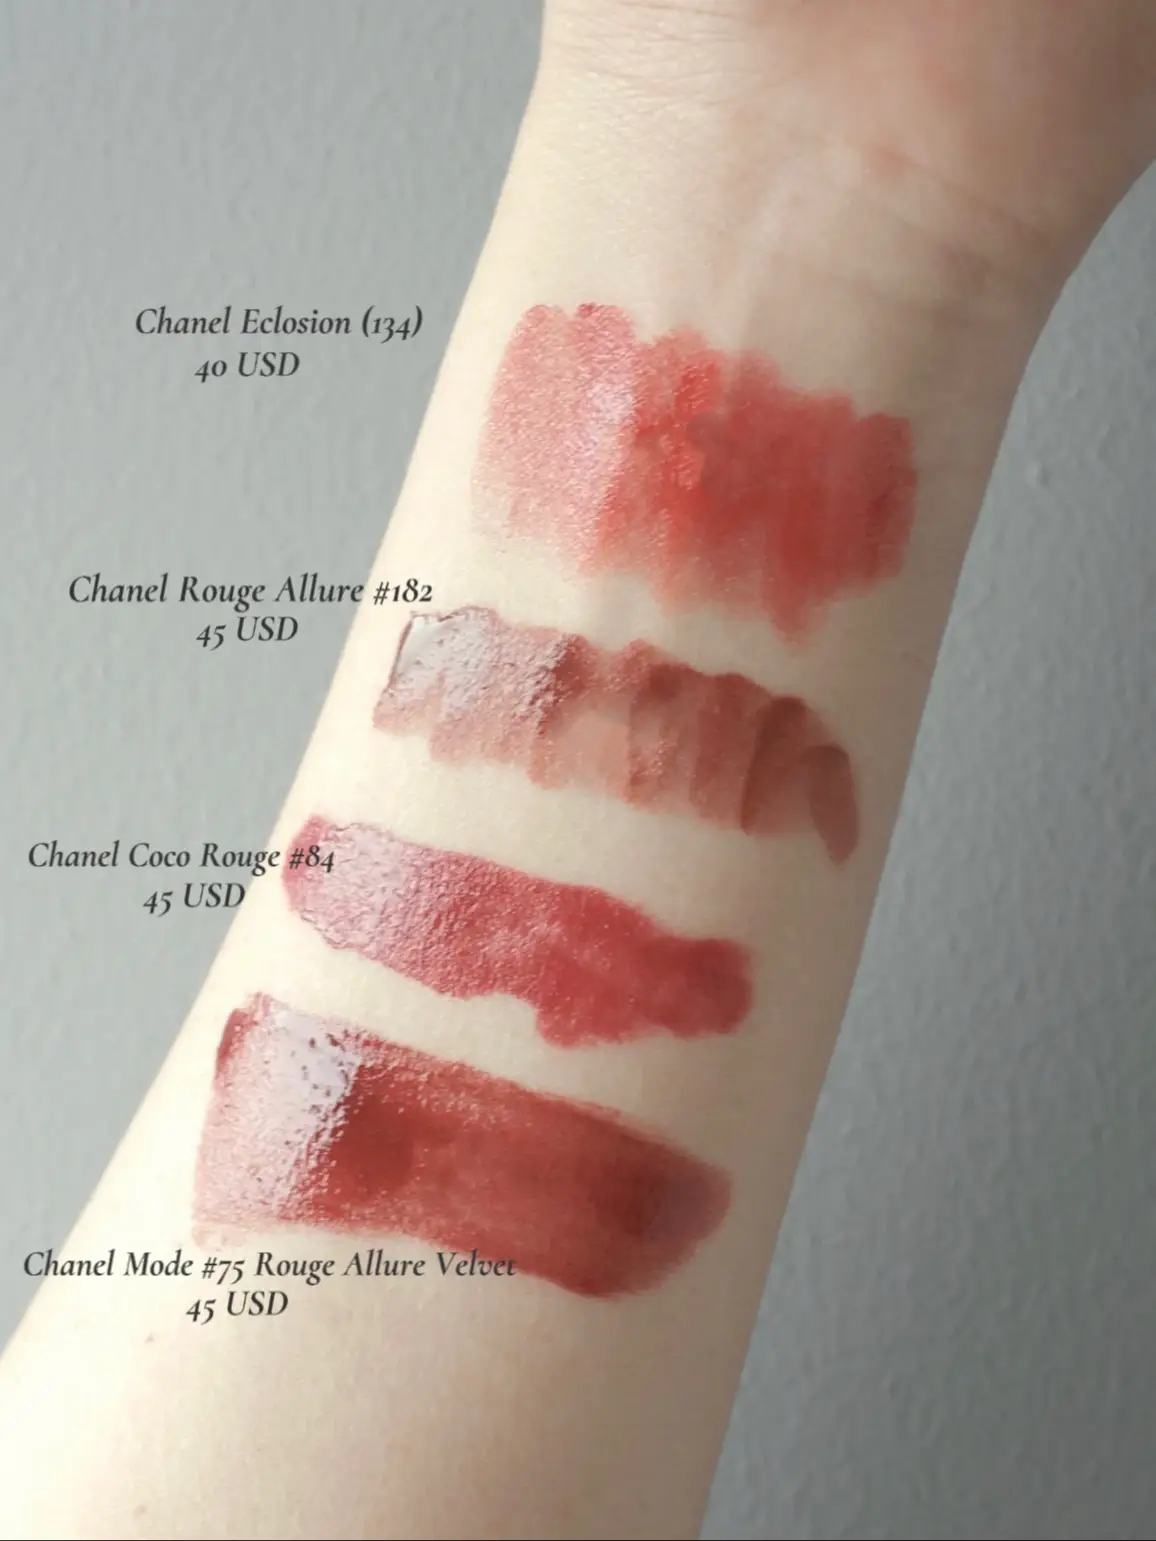 MY NUDE SHADES OF LIPSTICK FROM CHANEL